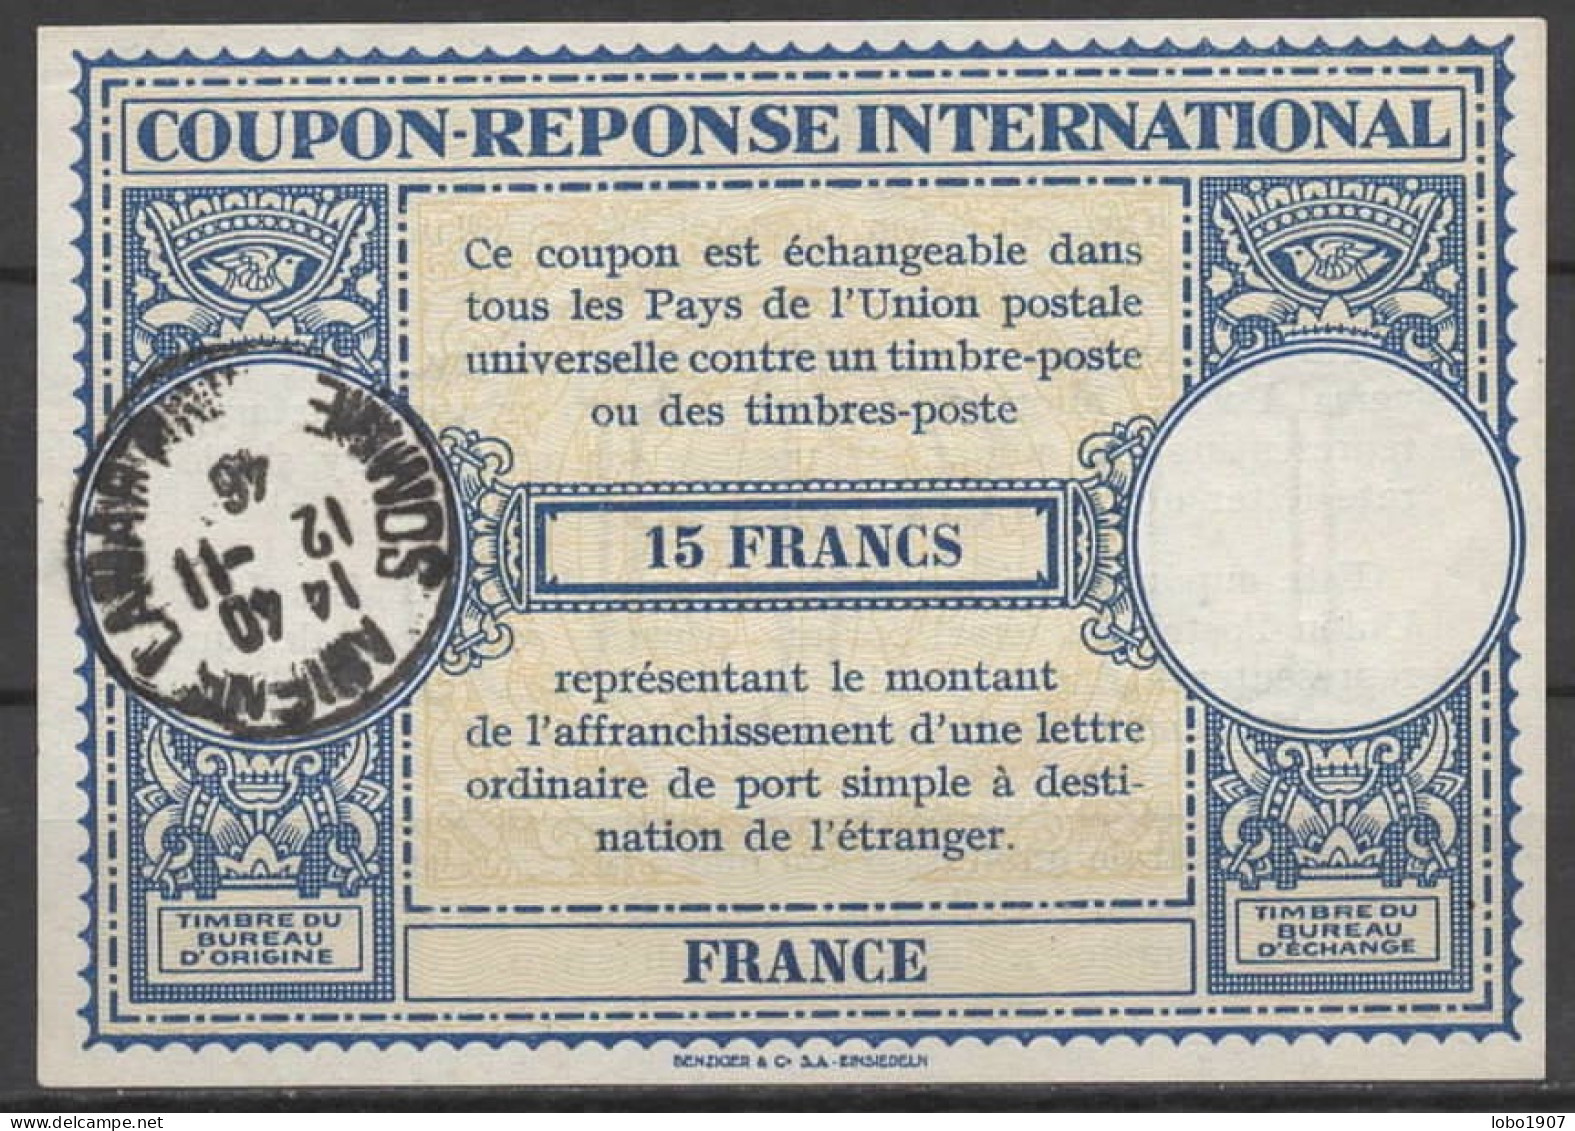 FRANCE  Lo14o  15 FRANCS  International Reply Coupon Reponse Antwortschein IRC IAS Cupon Respuesta O AMIENS LAMARTINE - - Reply Coupons